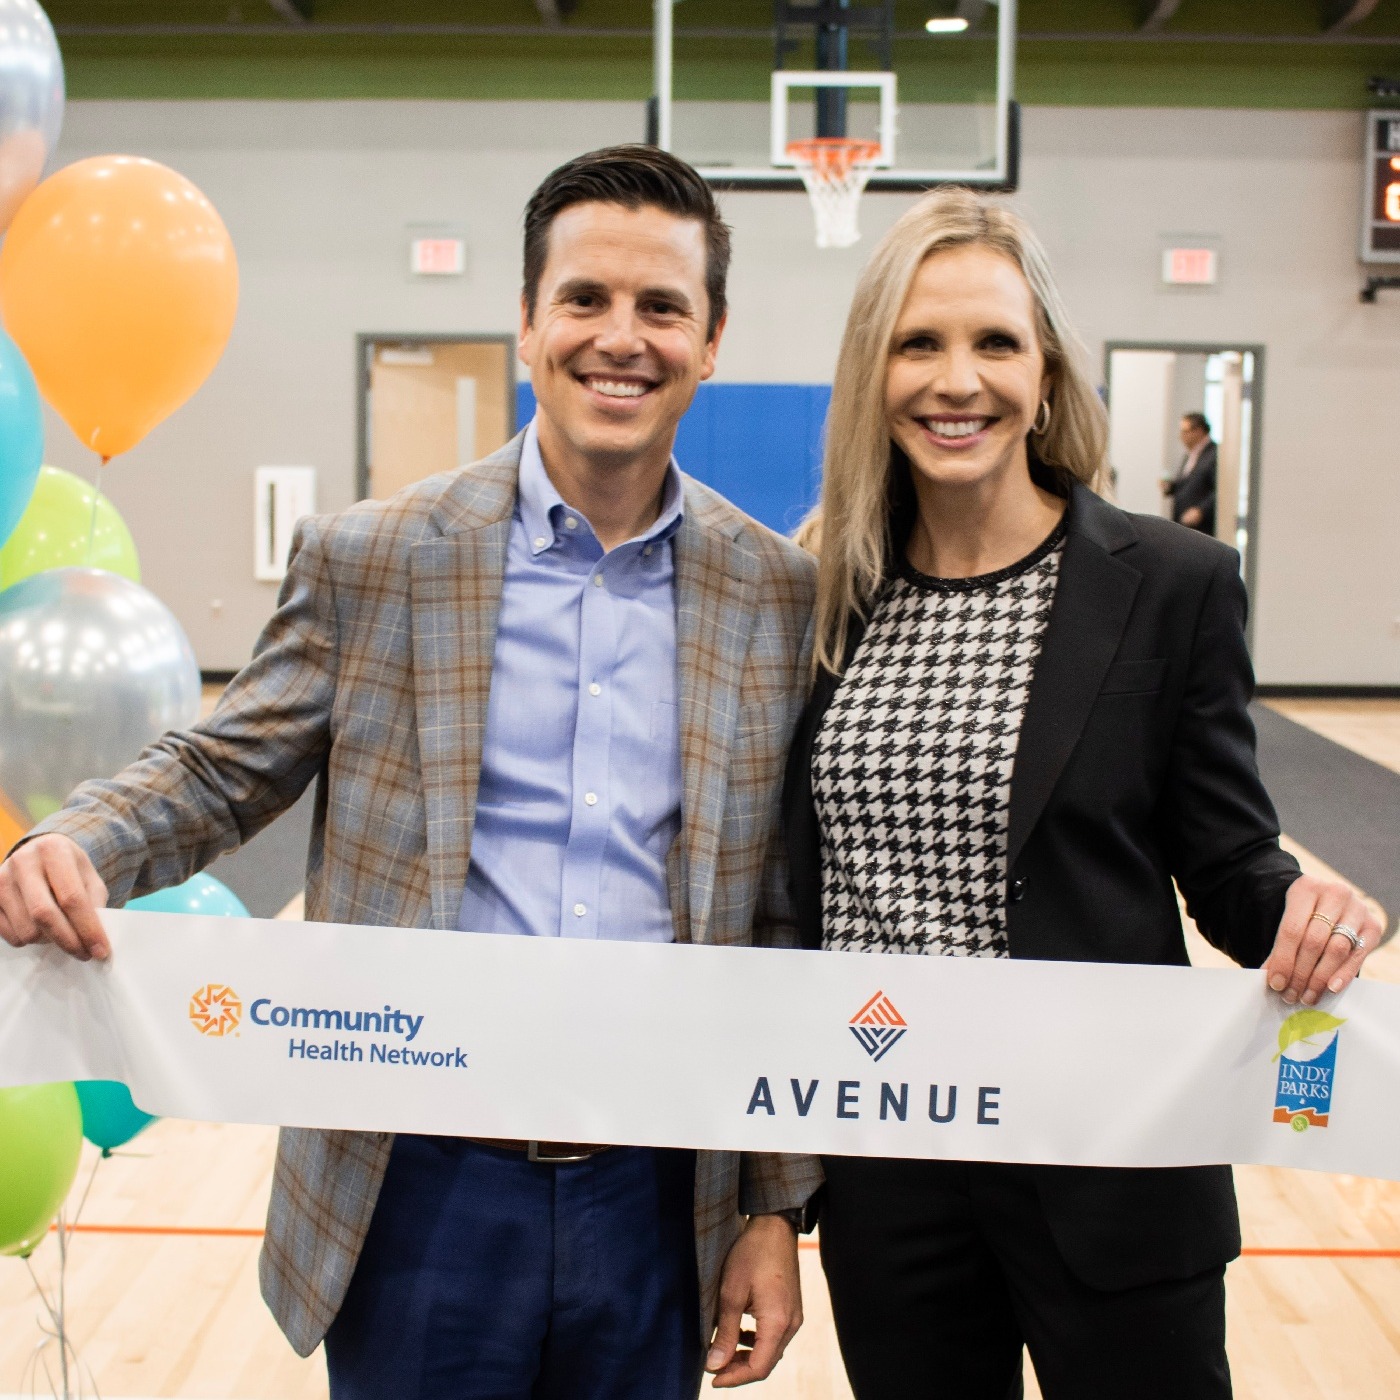 Team Avenue announces grand opening at Broad Ripple Family Park